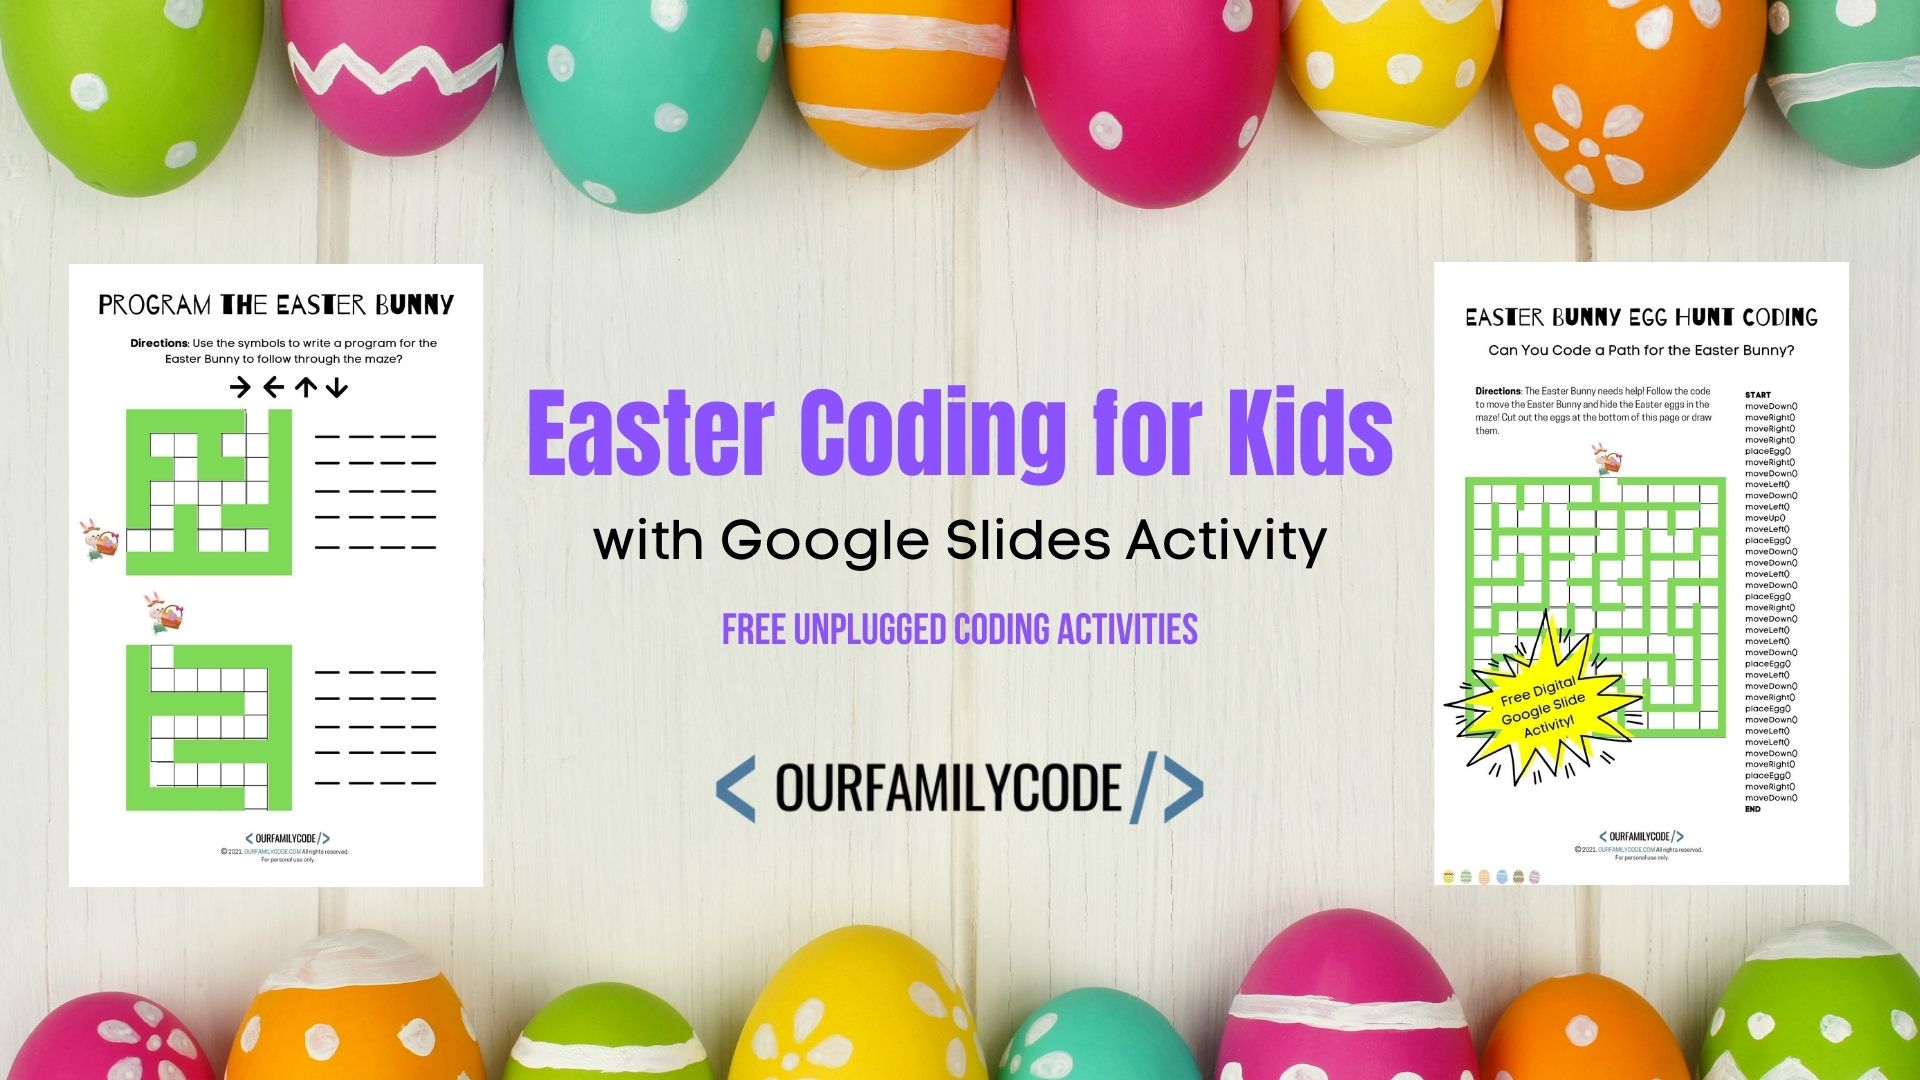 bh fb Easter unplugged coding This elementary egg hunt coding activity is a great Easter-themed way to introduce the basics of computer programming to kids in Kindergarten through 5th grade.